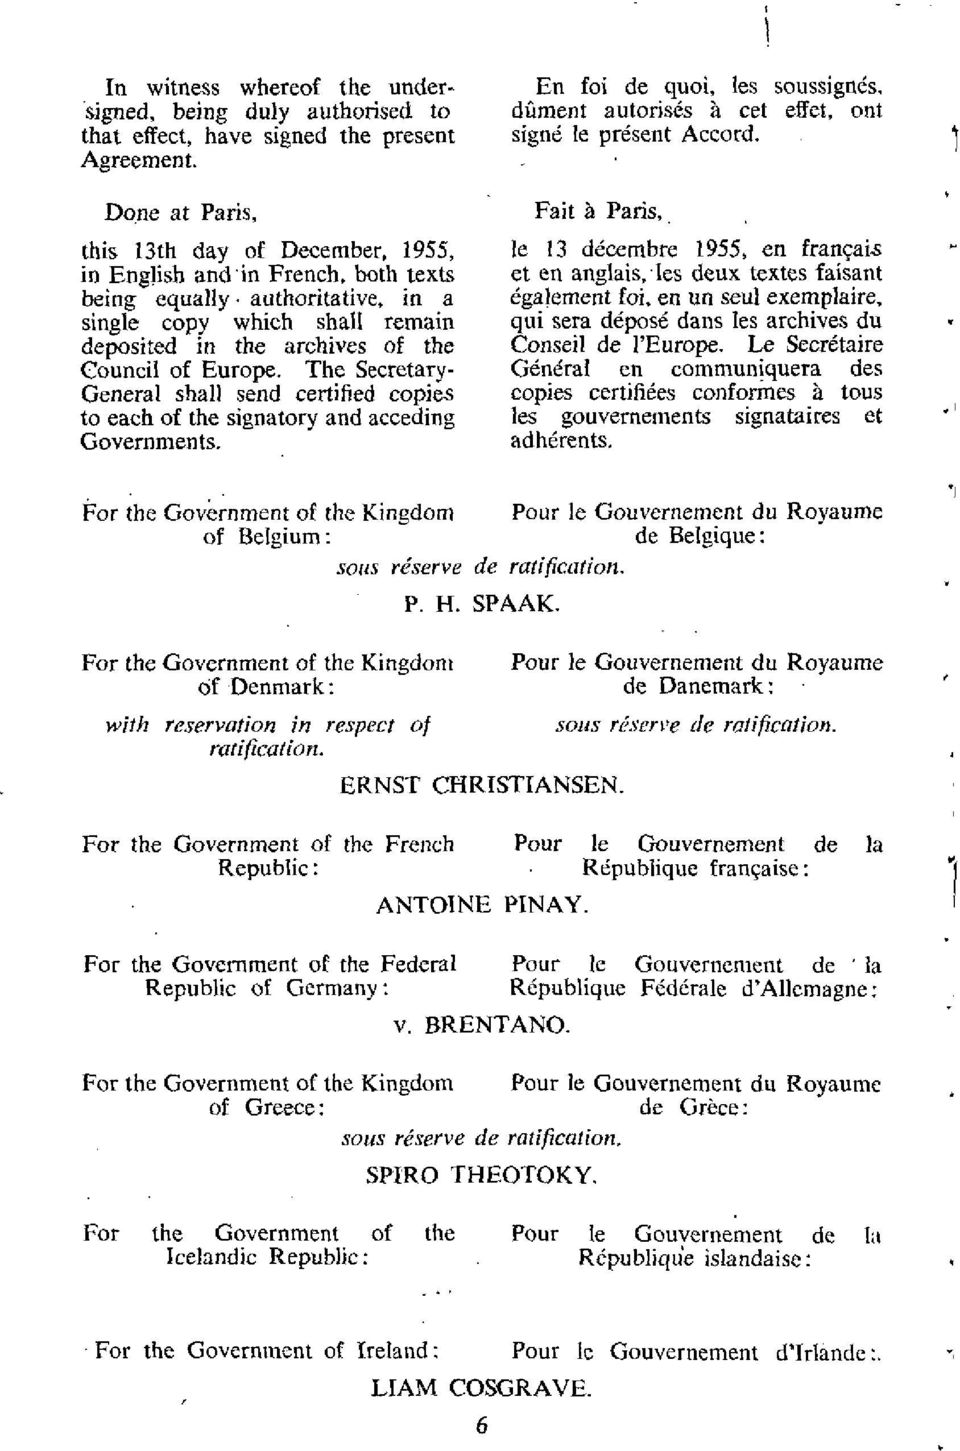 Europe. The Secretary- General shall send certified copies to each of the signatory and acceding Governments. En foi de quoi, les soussignes, dument autorises a eel effet, ont signe le present Accord.